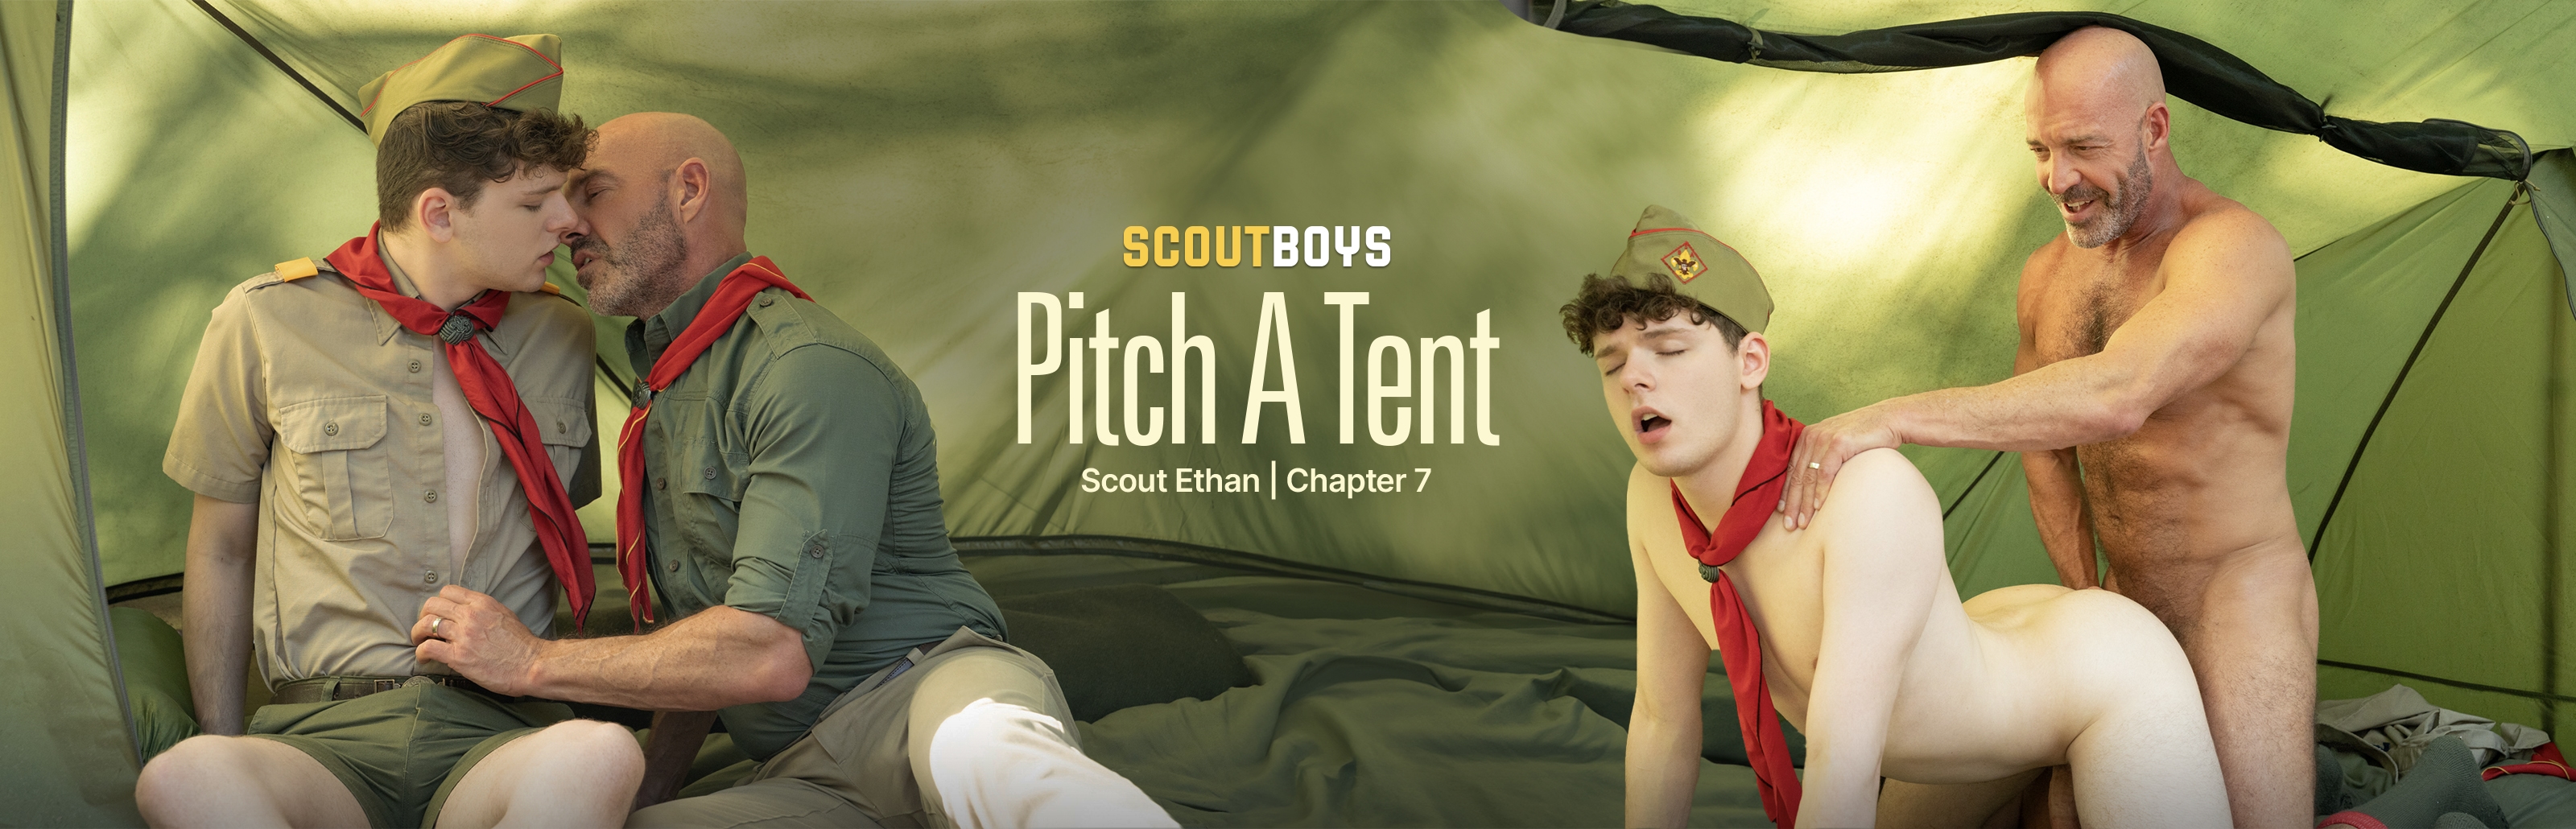 Pitch A Tent | SCOUT ETHAN | Chapter 7 Photos 97